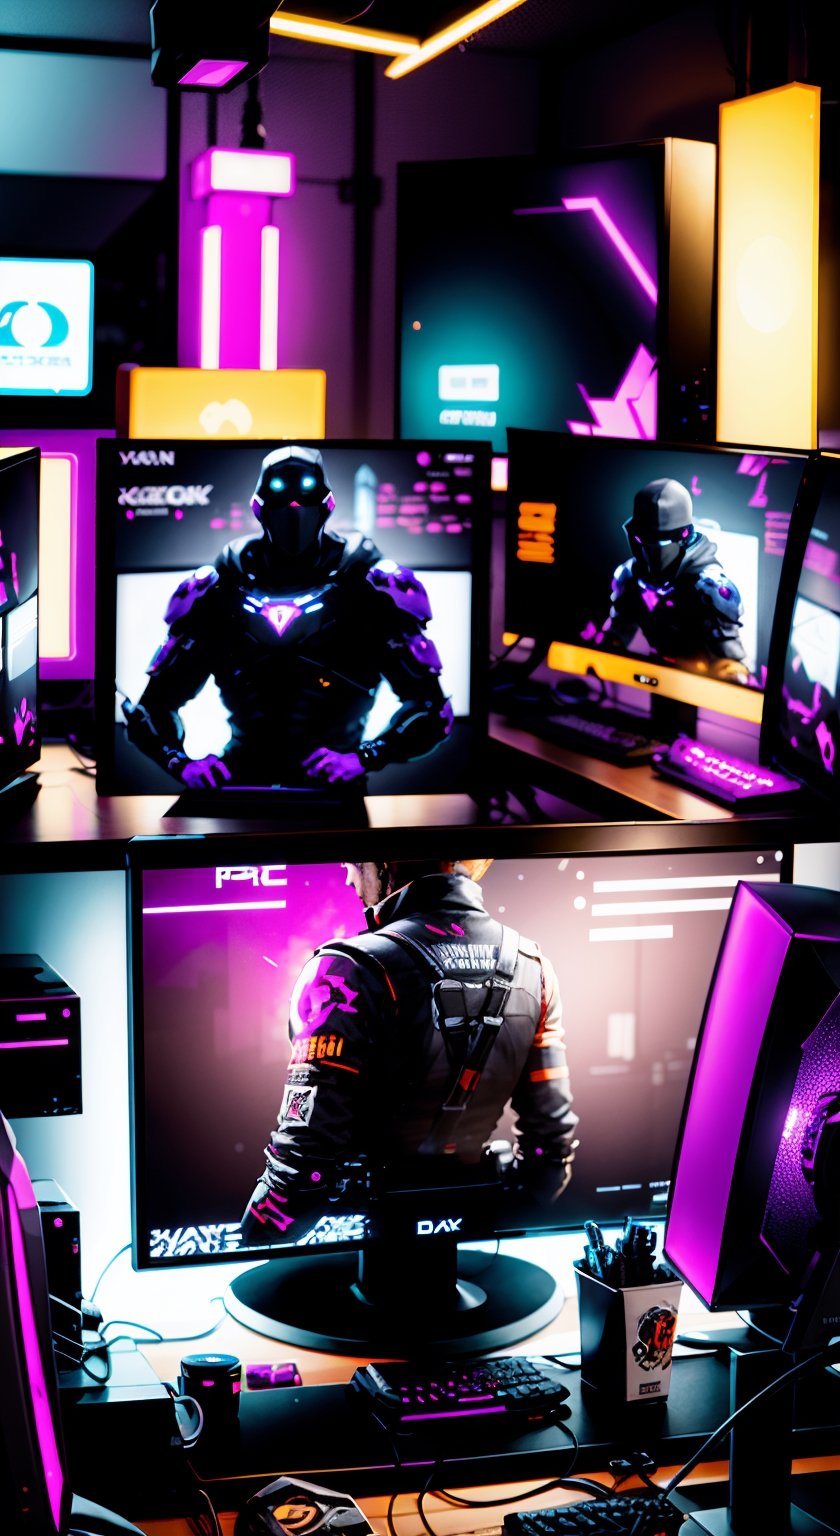 pc gamer setup, a dimly lit gaming room with multiple monitors and a gaming chair, gaming room, cyberpunk setting, dark setup, gamer themed, gaming room in 2 0 4 0, gamer aesthetic, gamer screen on metallic desk, 8 k wide shot, in a cyberpunk themed room, thicc build, purple and cyan lighting, satisfying cable management, cyberpunk vibe